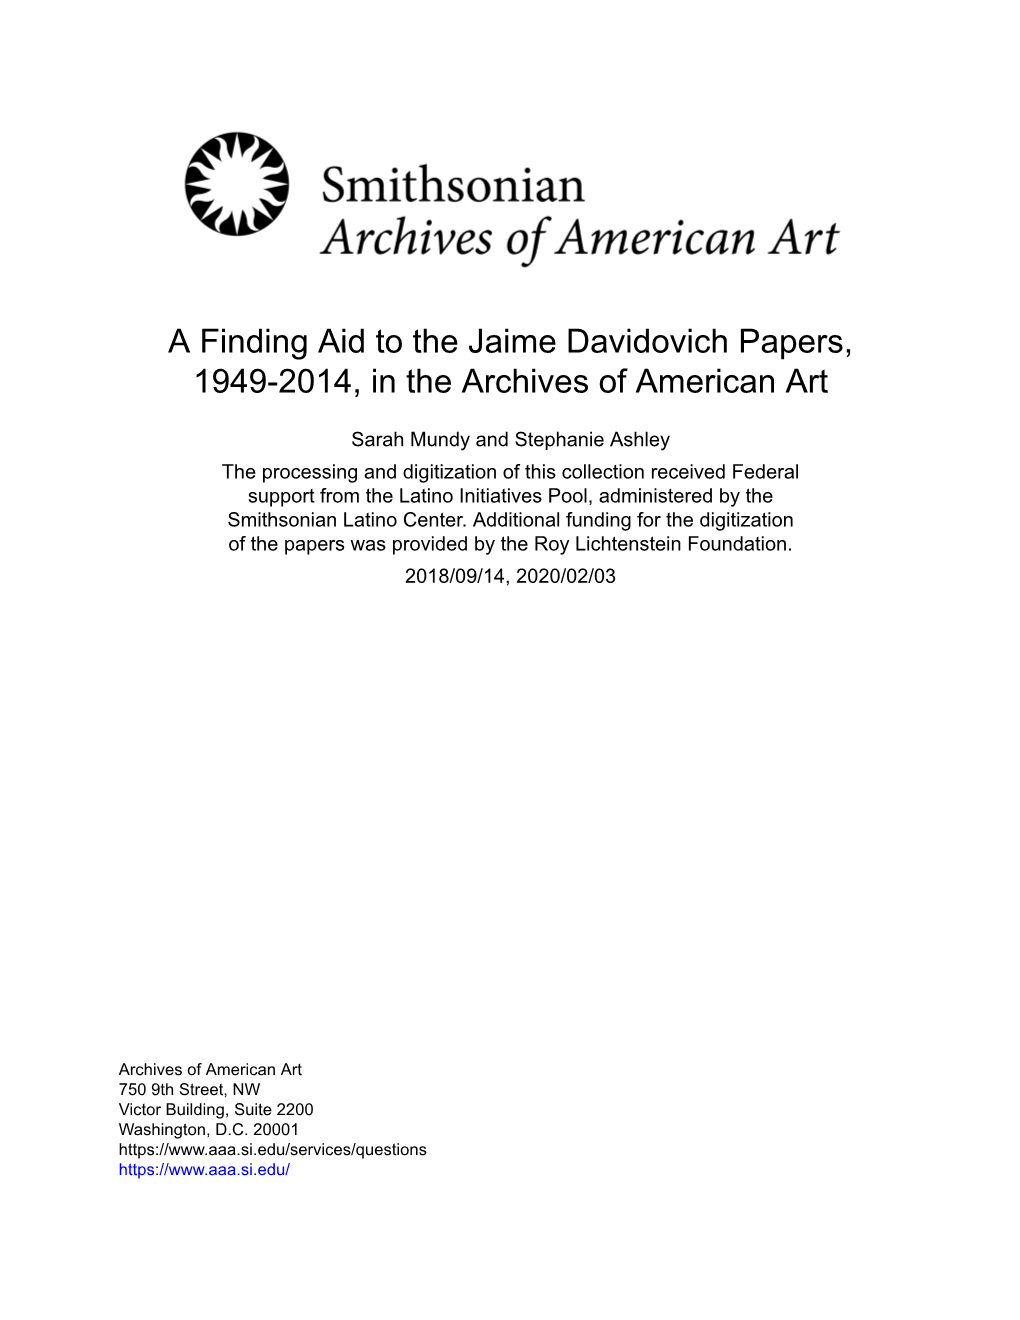 A Finding Aid to the Jaime Davidovich Papers, 1949-2014, in the Archives of American Art